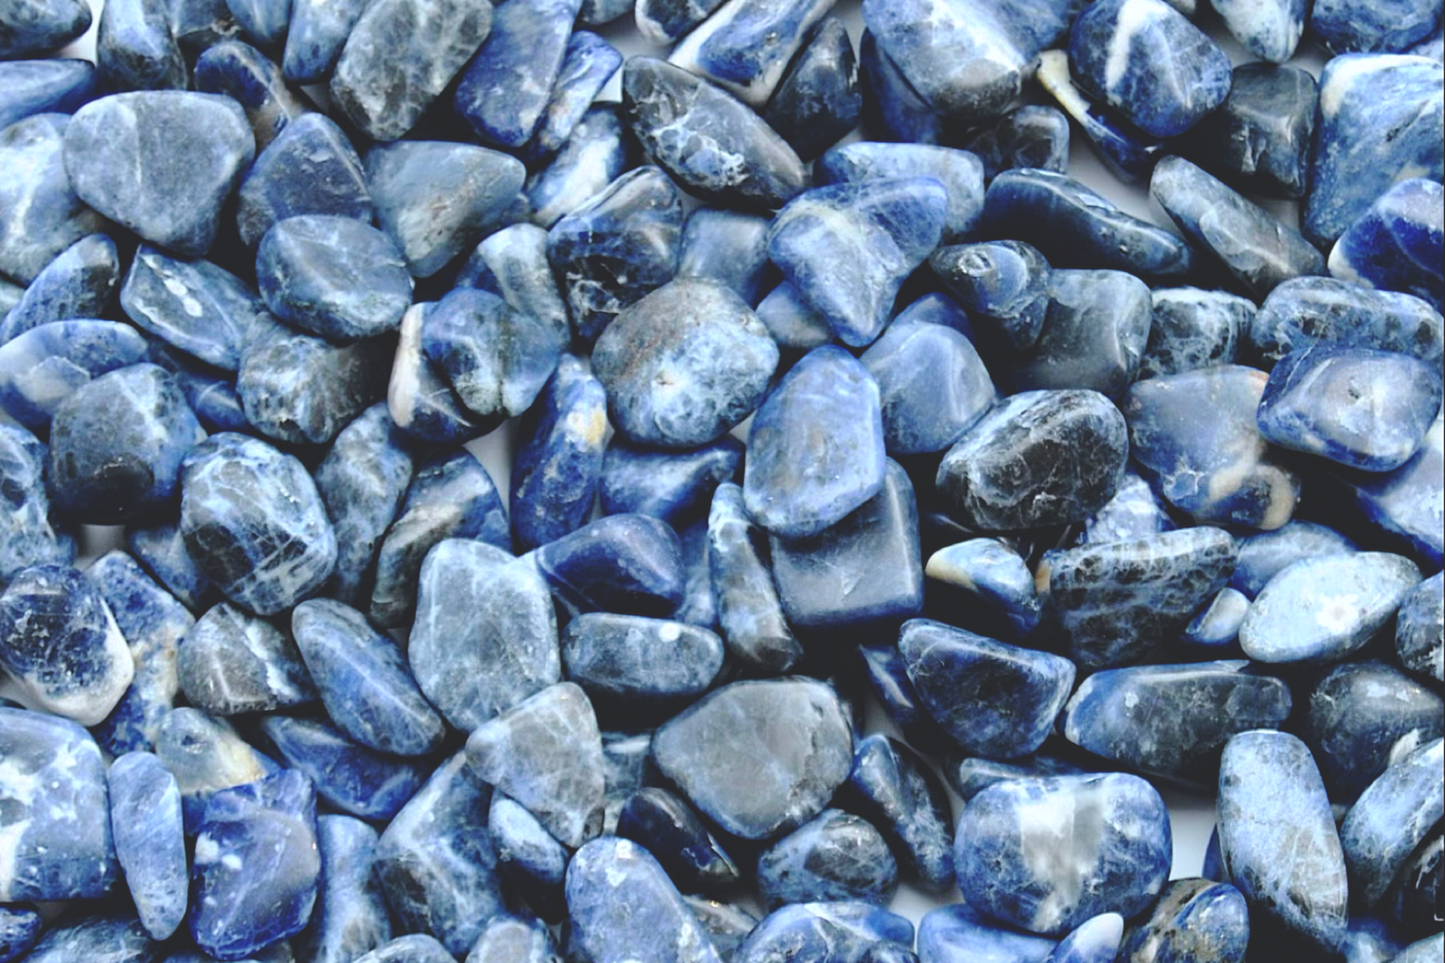 A top down view of an assortment of sodalite stones. The stones are various hues of blue with swirls of white on them.